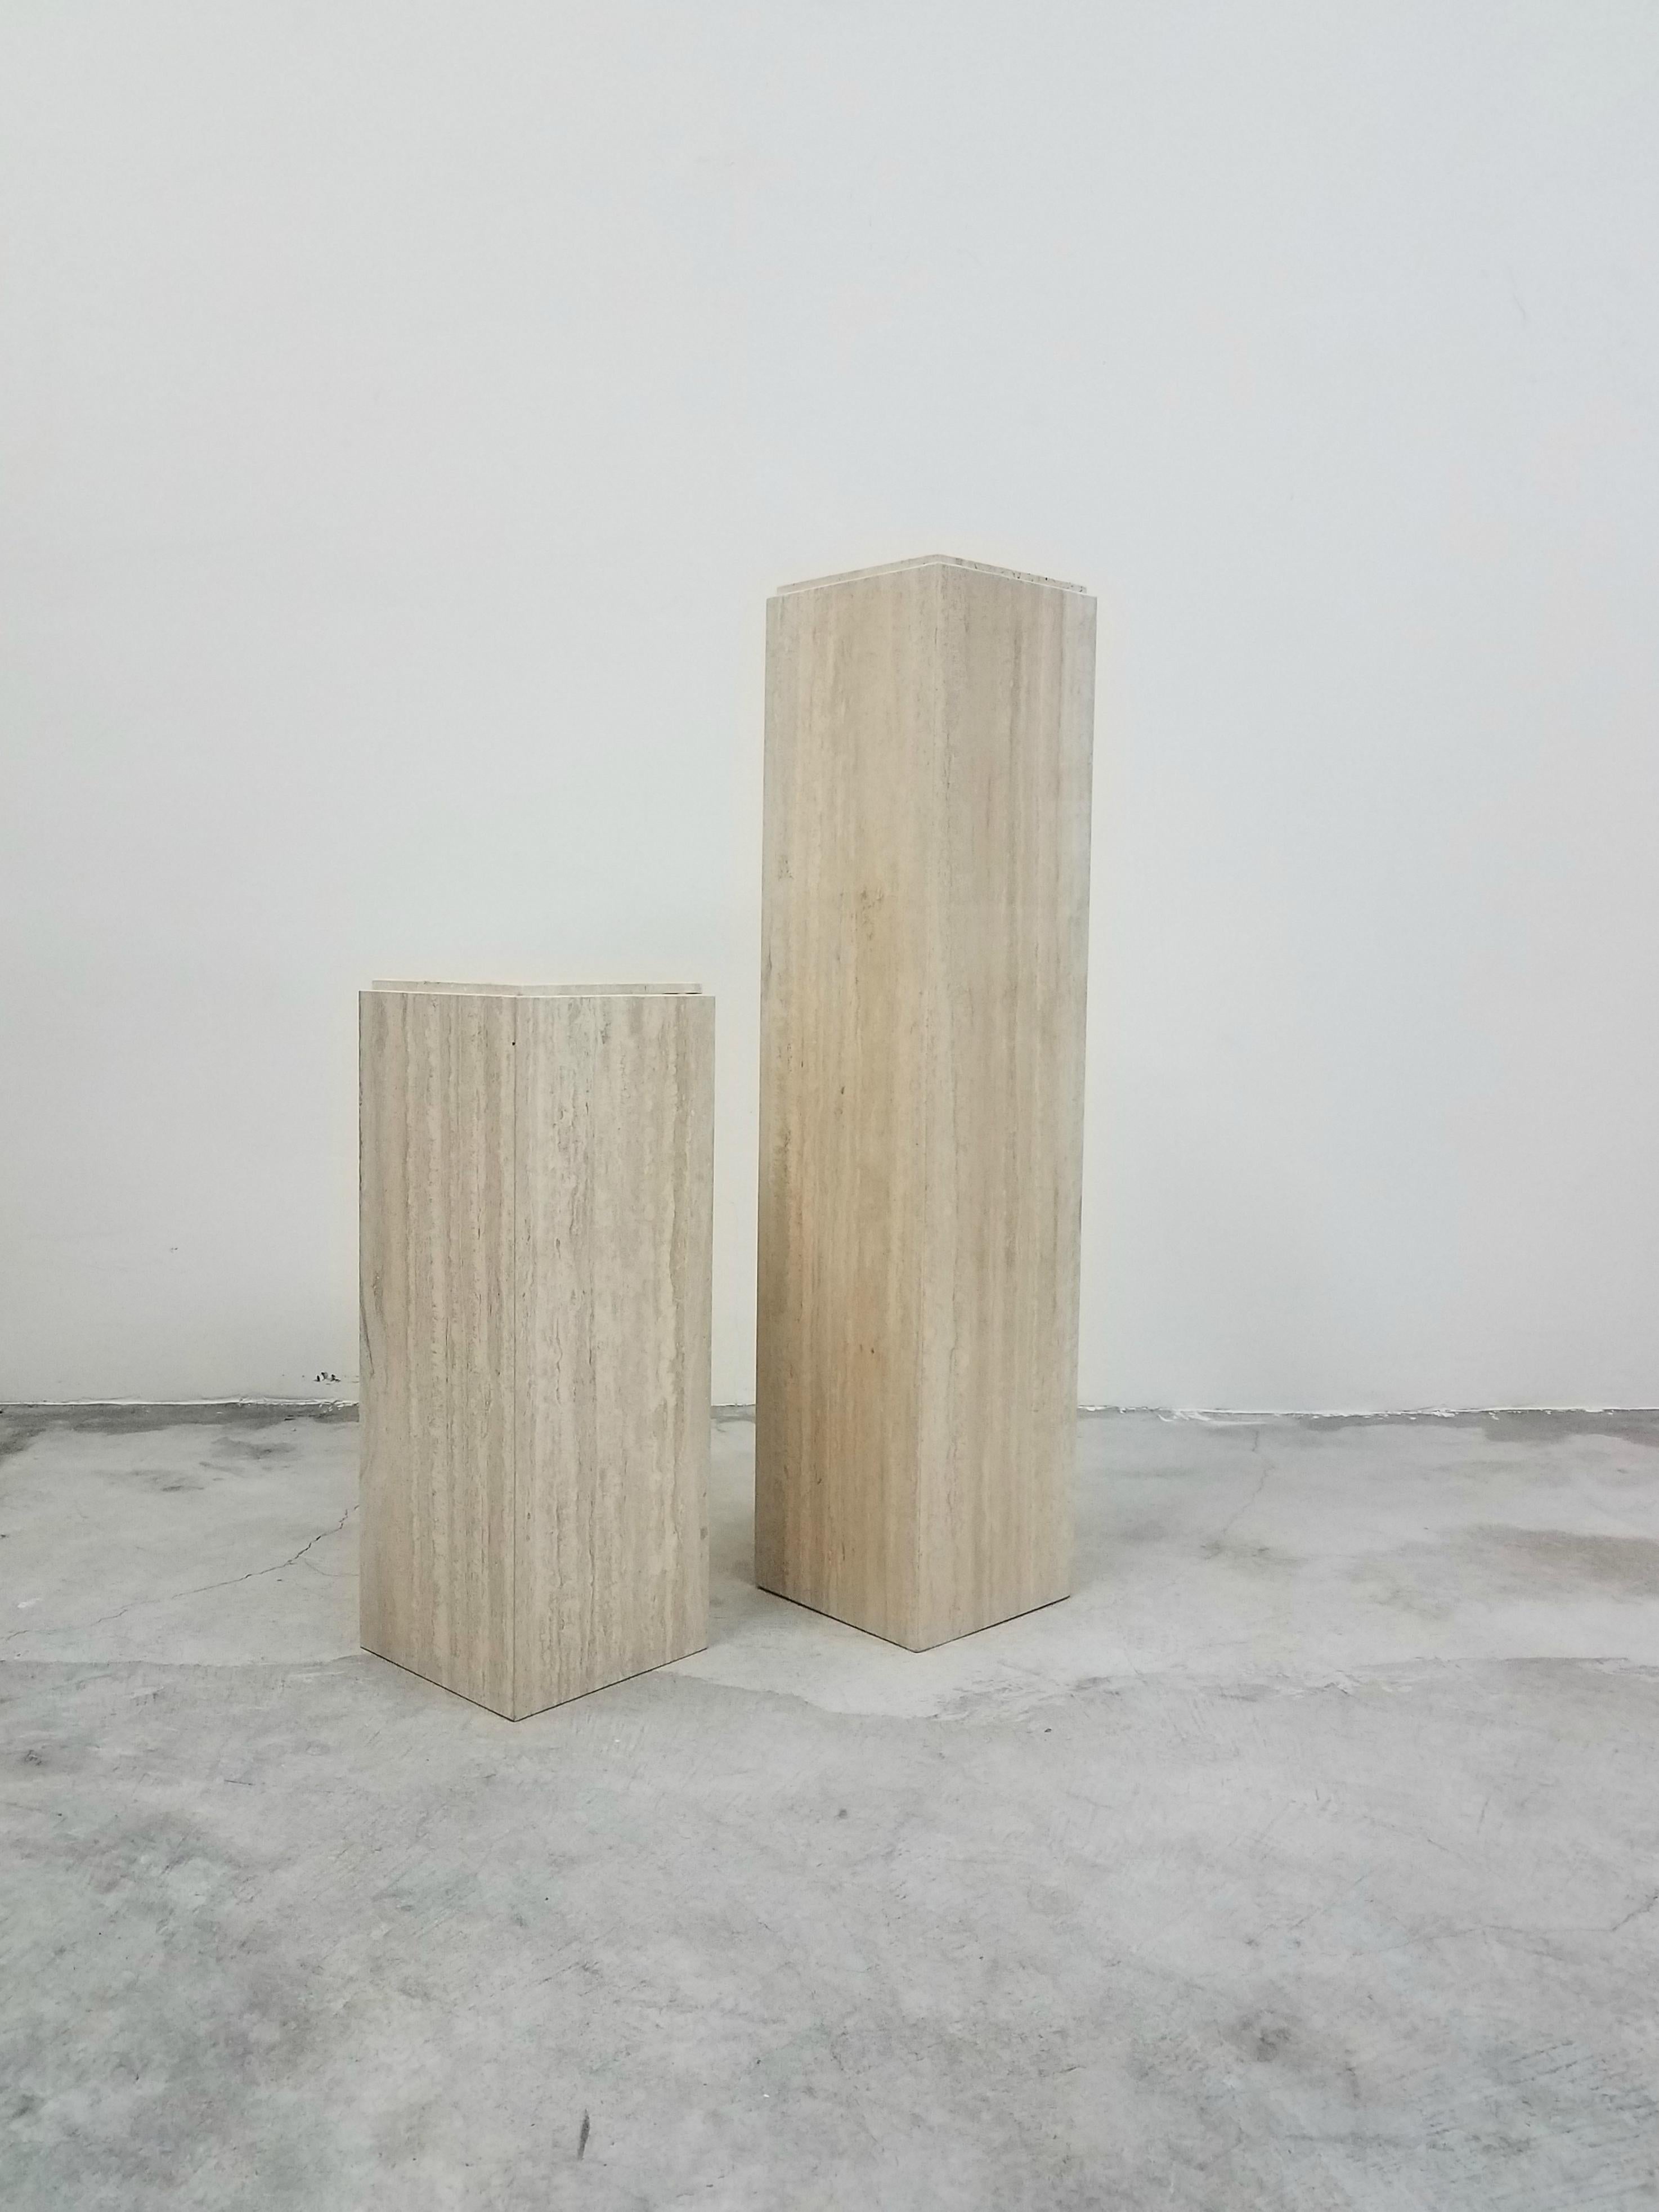 A beautiful coordinating pair of square Italian travertine pedestals. Perfect to display your favourite sculpture, bust or art piece. Pedestals are polished and have a unique top edge detail.

Pedestals are in excellent condition.

**Pricing is for